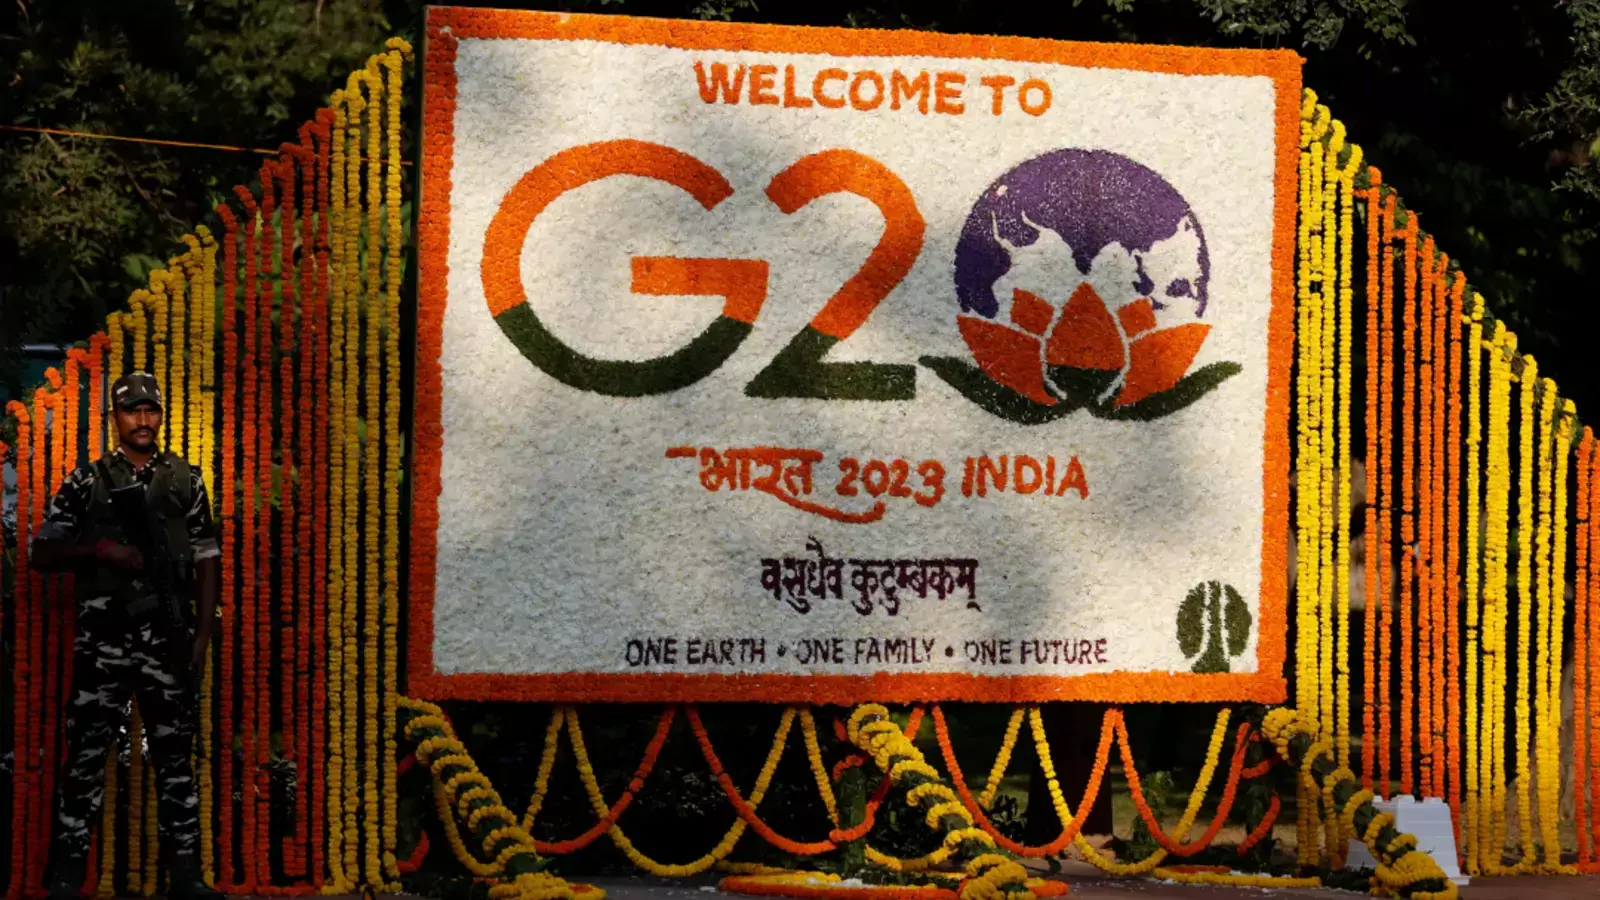 Indian security personnel stands guard ahead of the G20 summit.